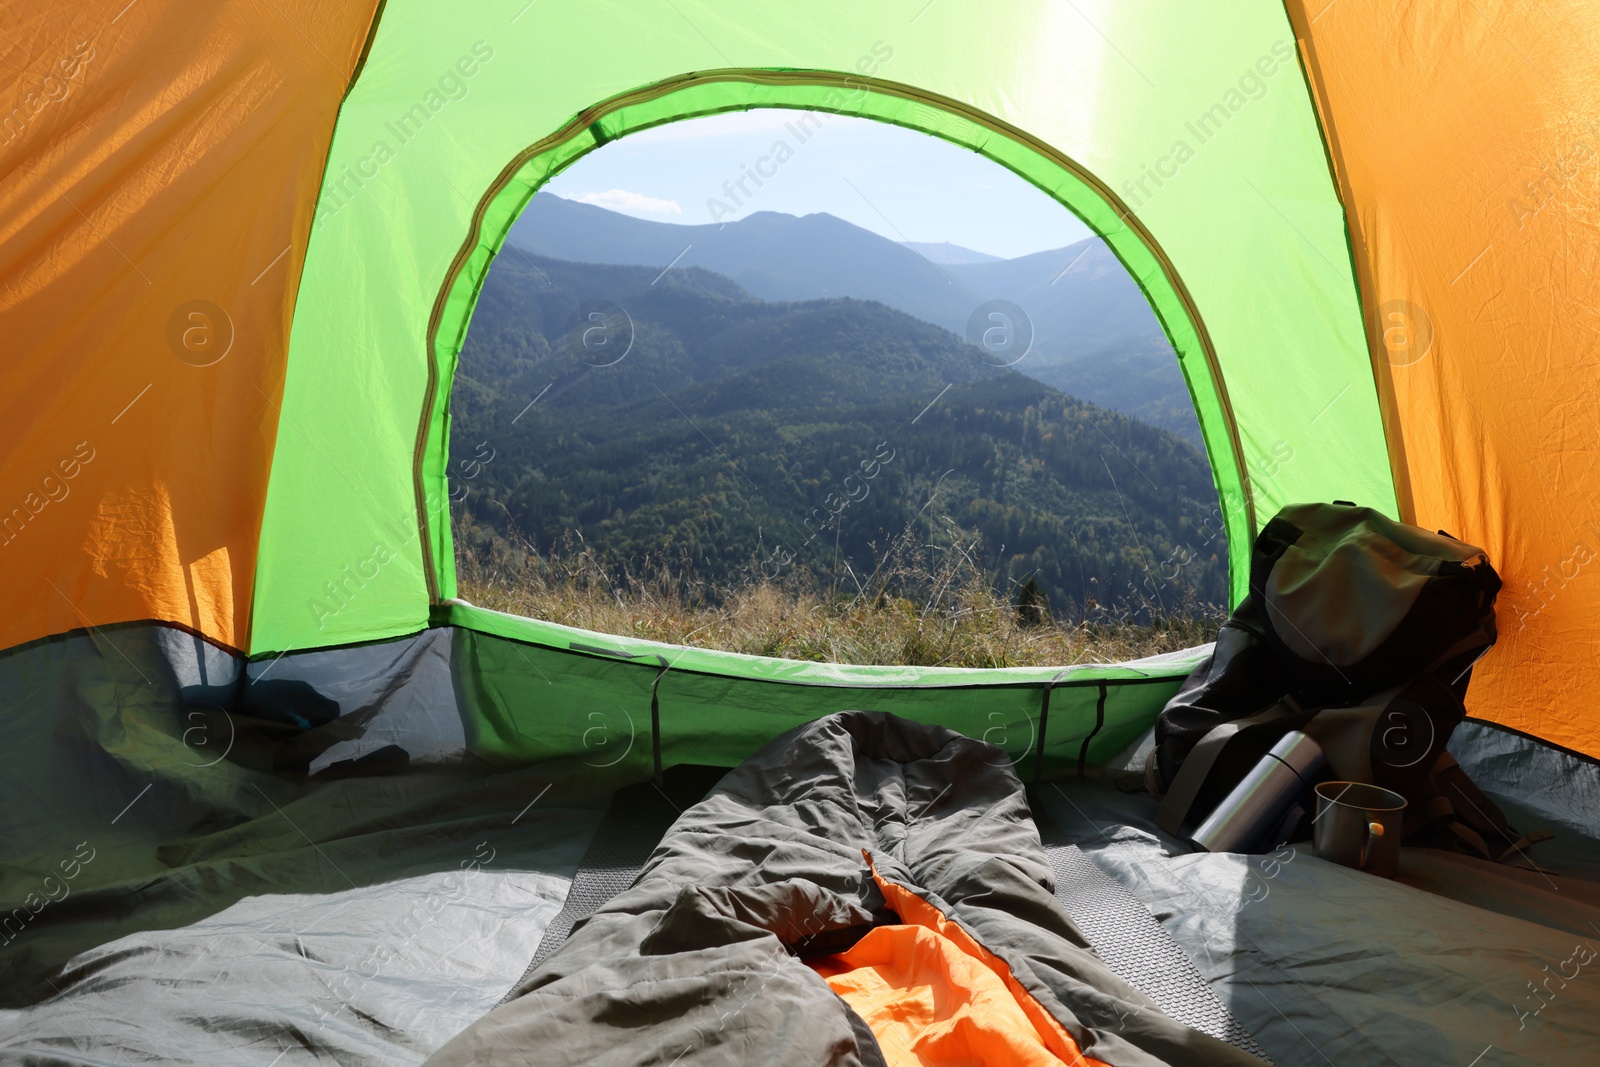 Photo of Camping tent with sleeping bag in mountains, view from inside